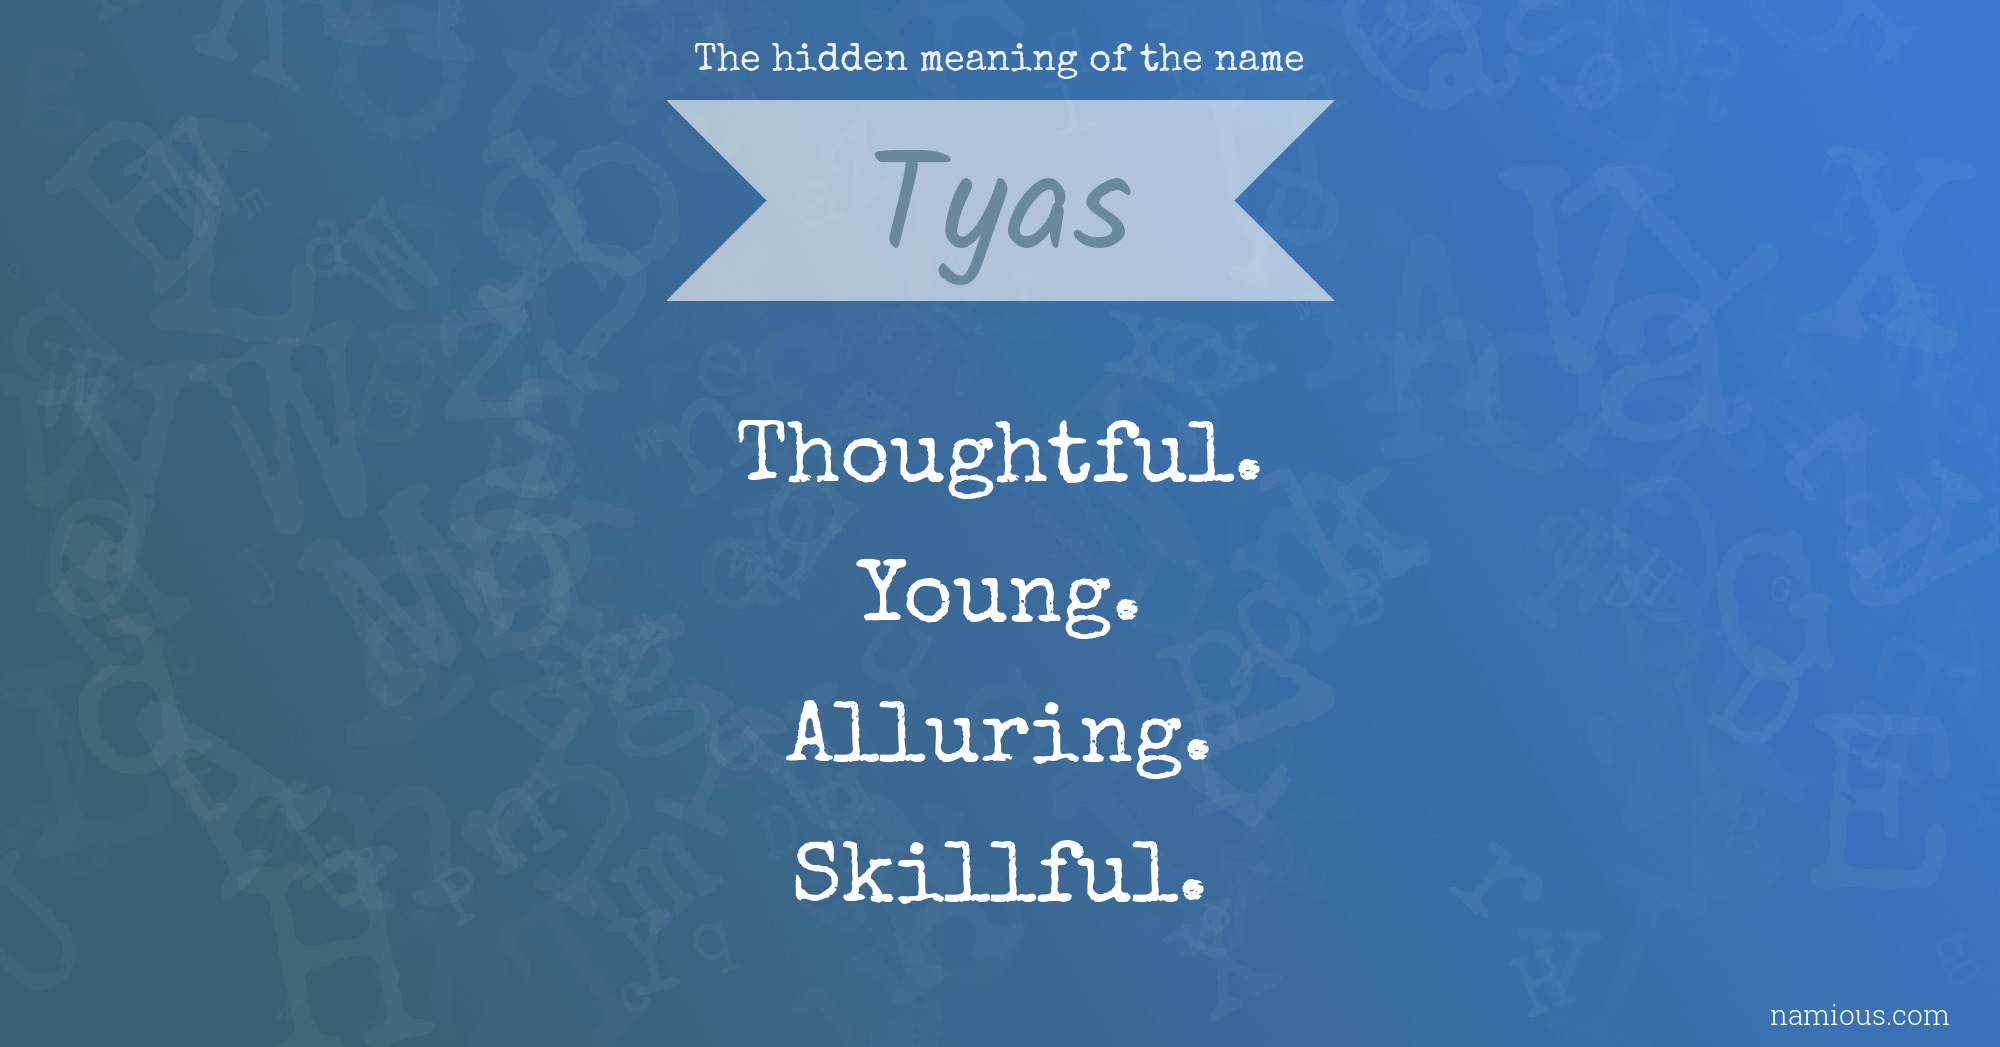 The hidden meaning of the name Tyas